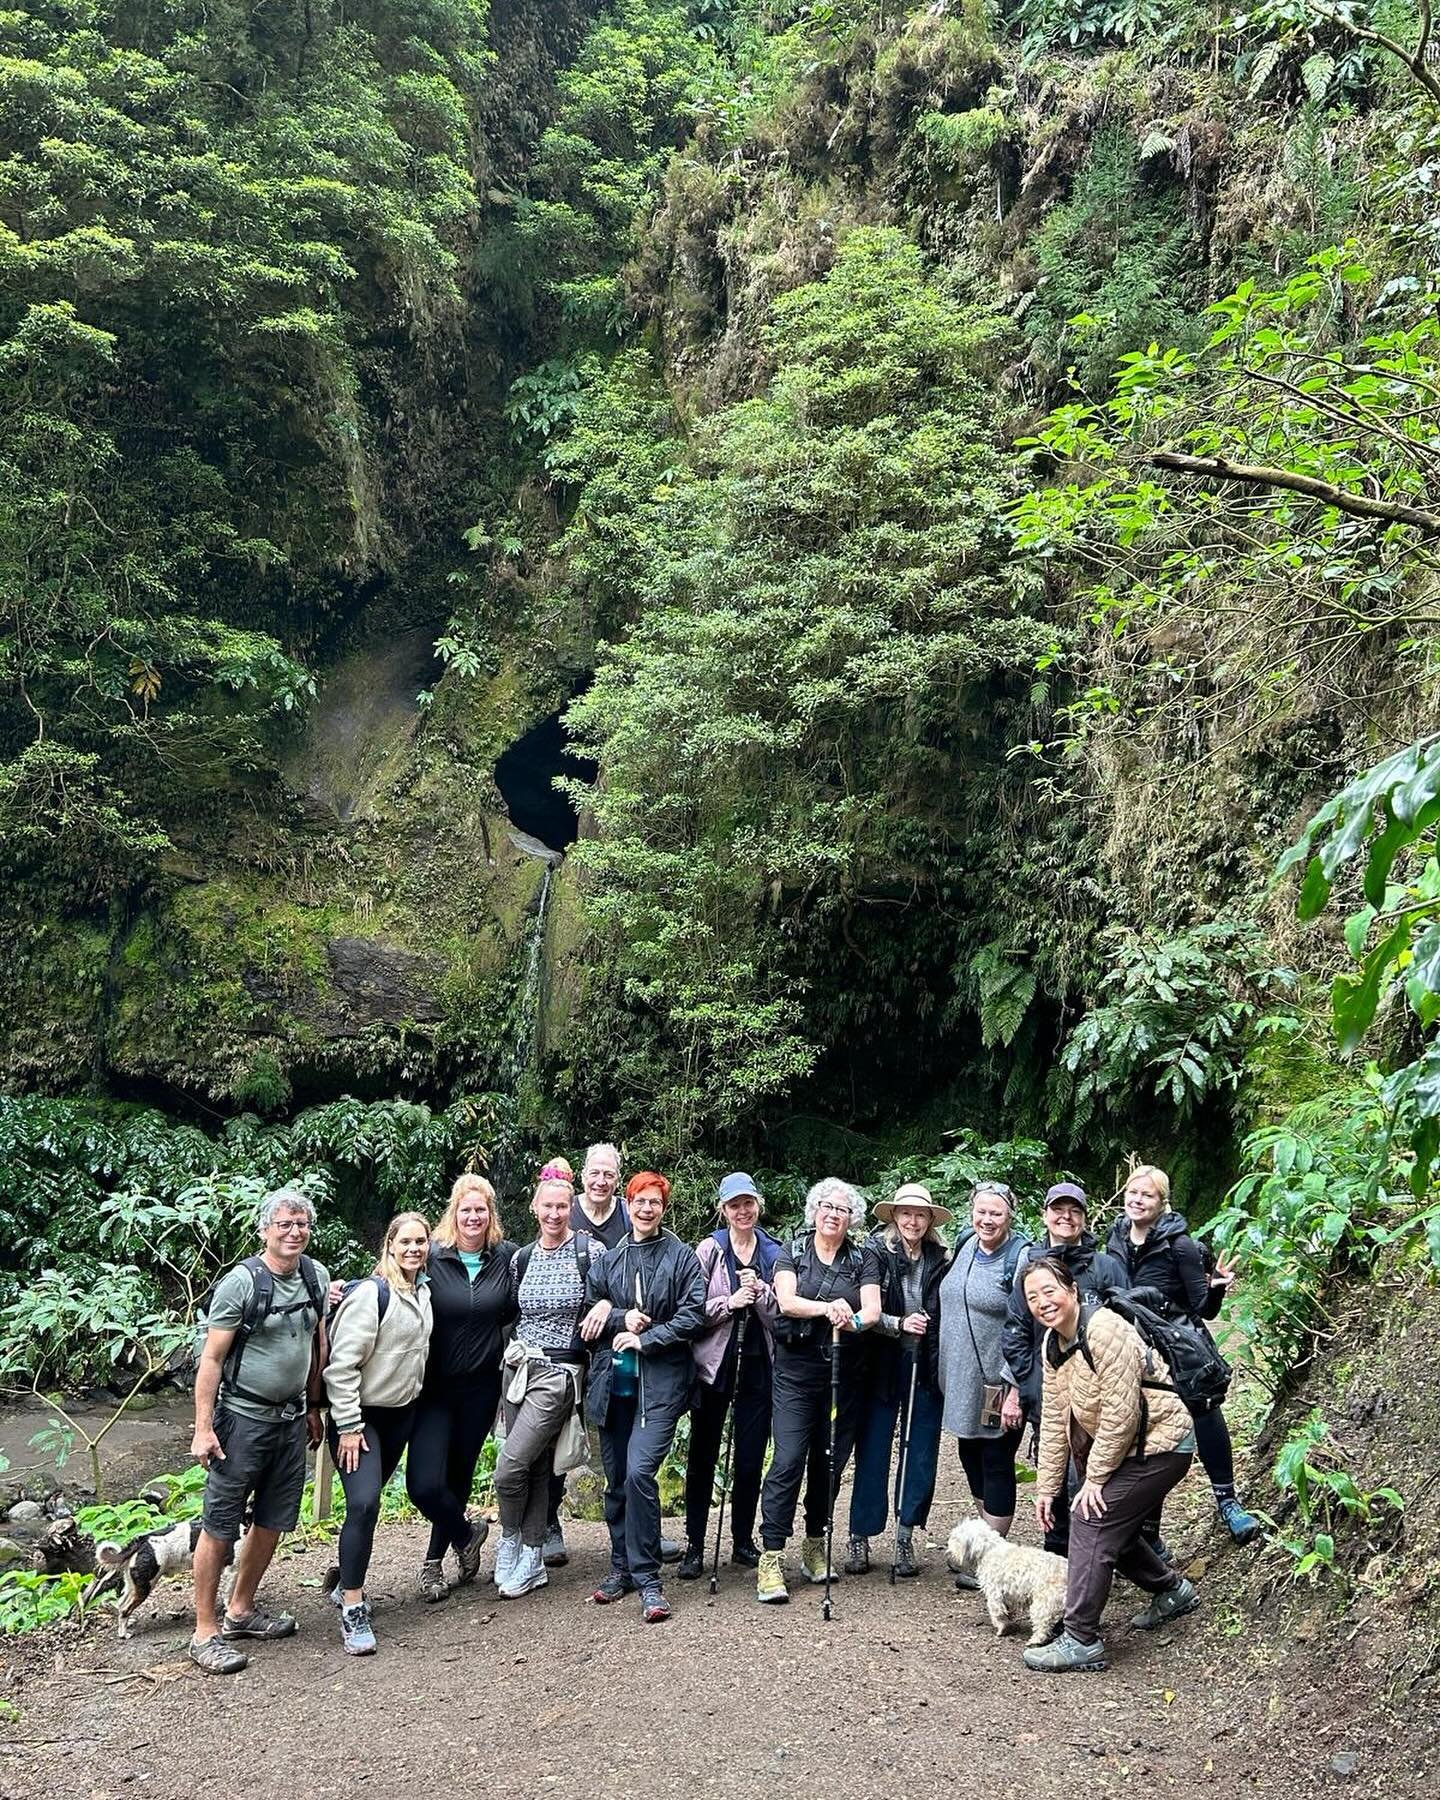 The Azores weren&rsquo;t even on my radar a couple of years ago. I&rsquo;m so grateful they are now! I feel blessed to have spent the last week exploring the subtropical rain forests, hot springs, and ancient volcanos and eating the delicious local f